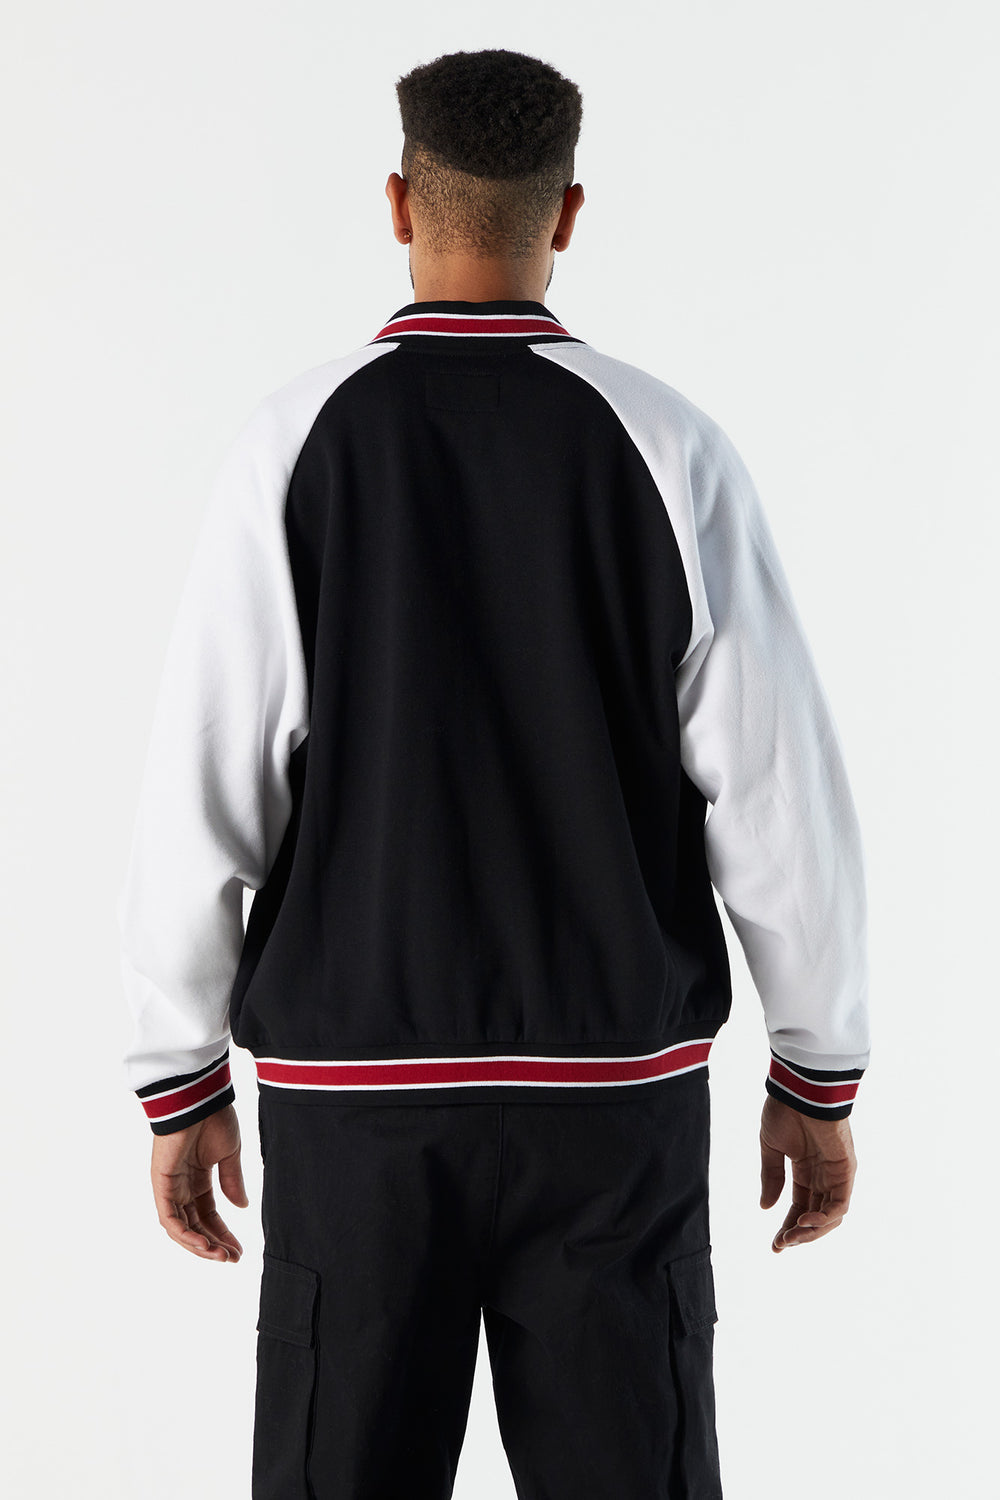 Reckless Embroidered Varsity Jacket Reckless Embroidered Varsity Jacket 3